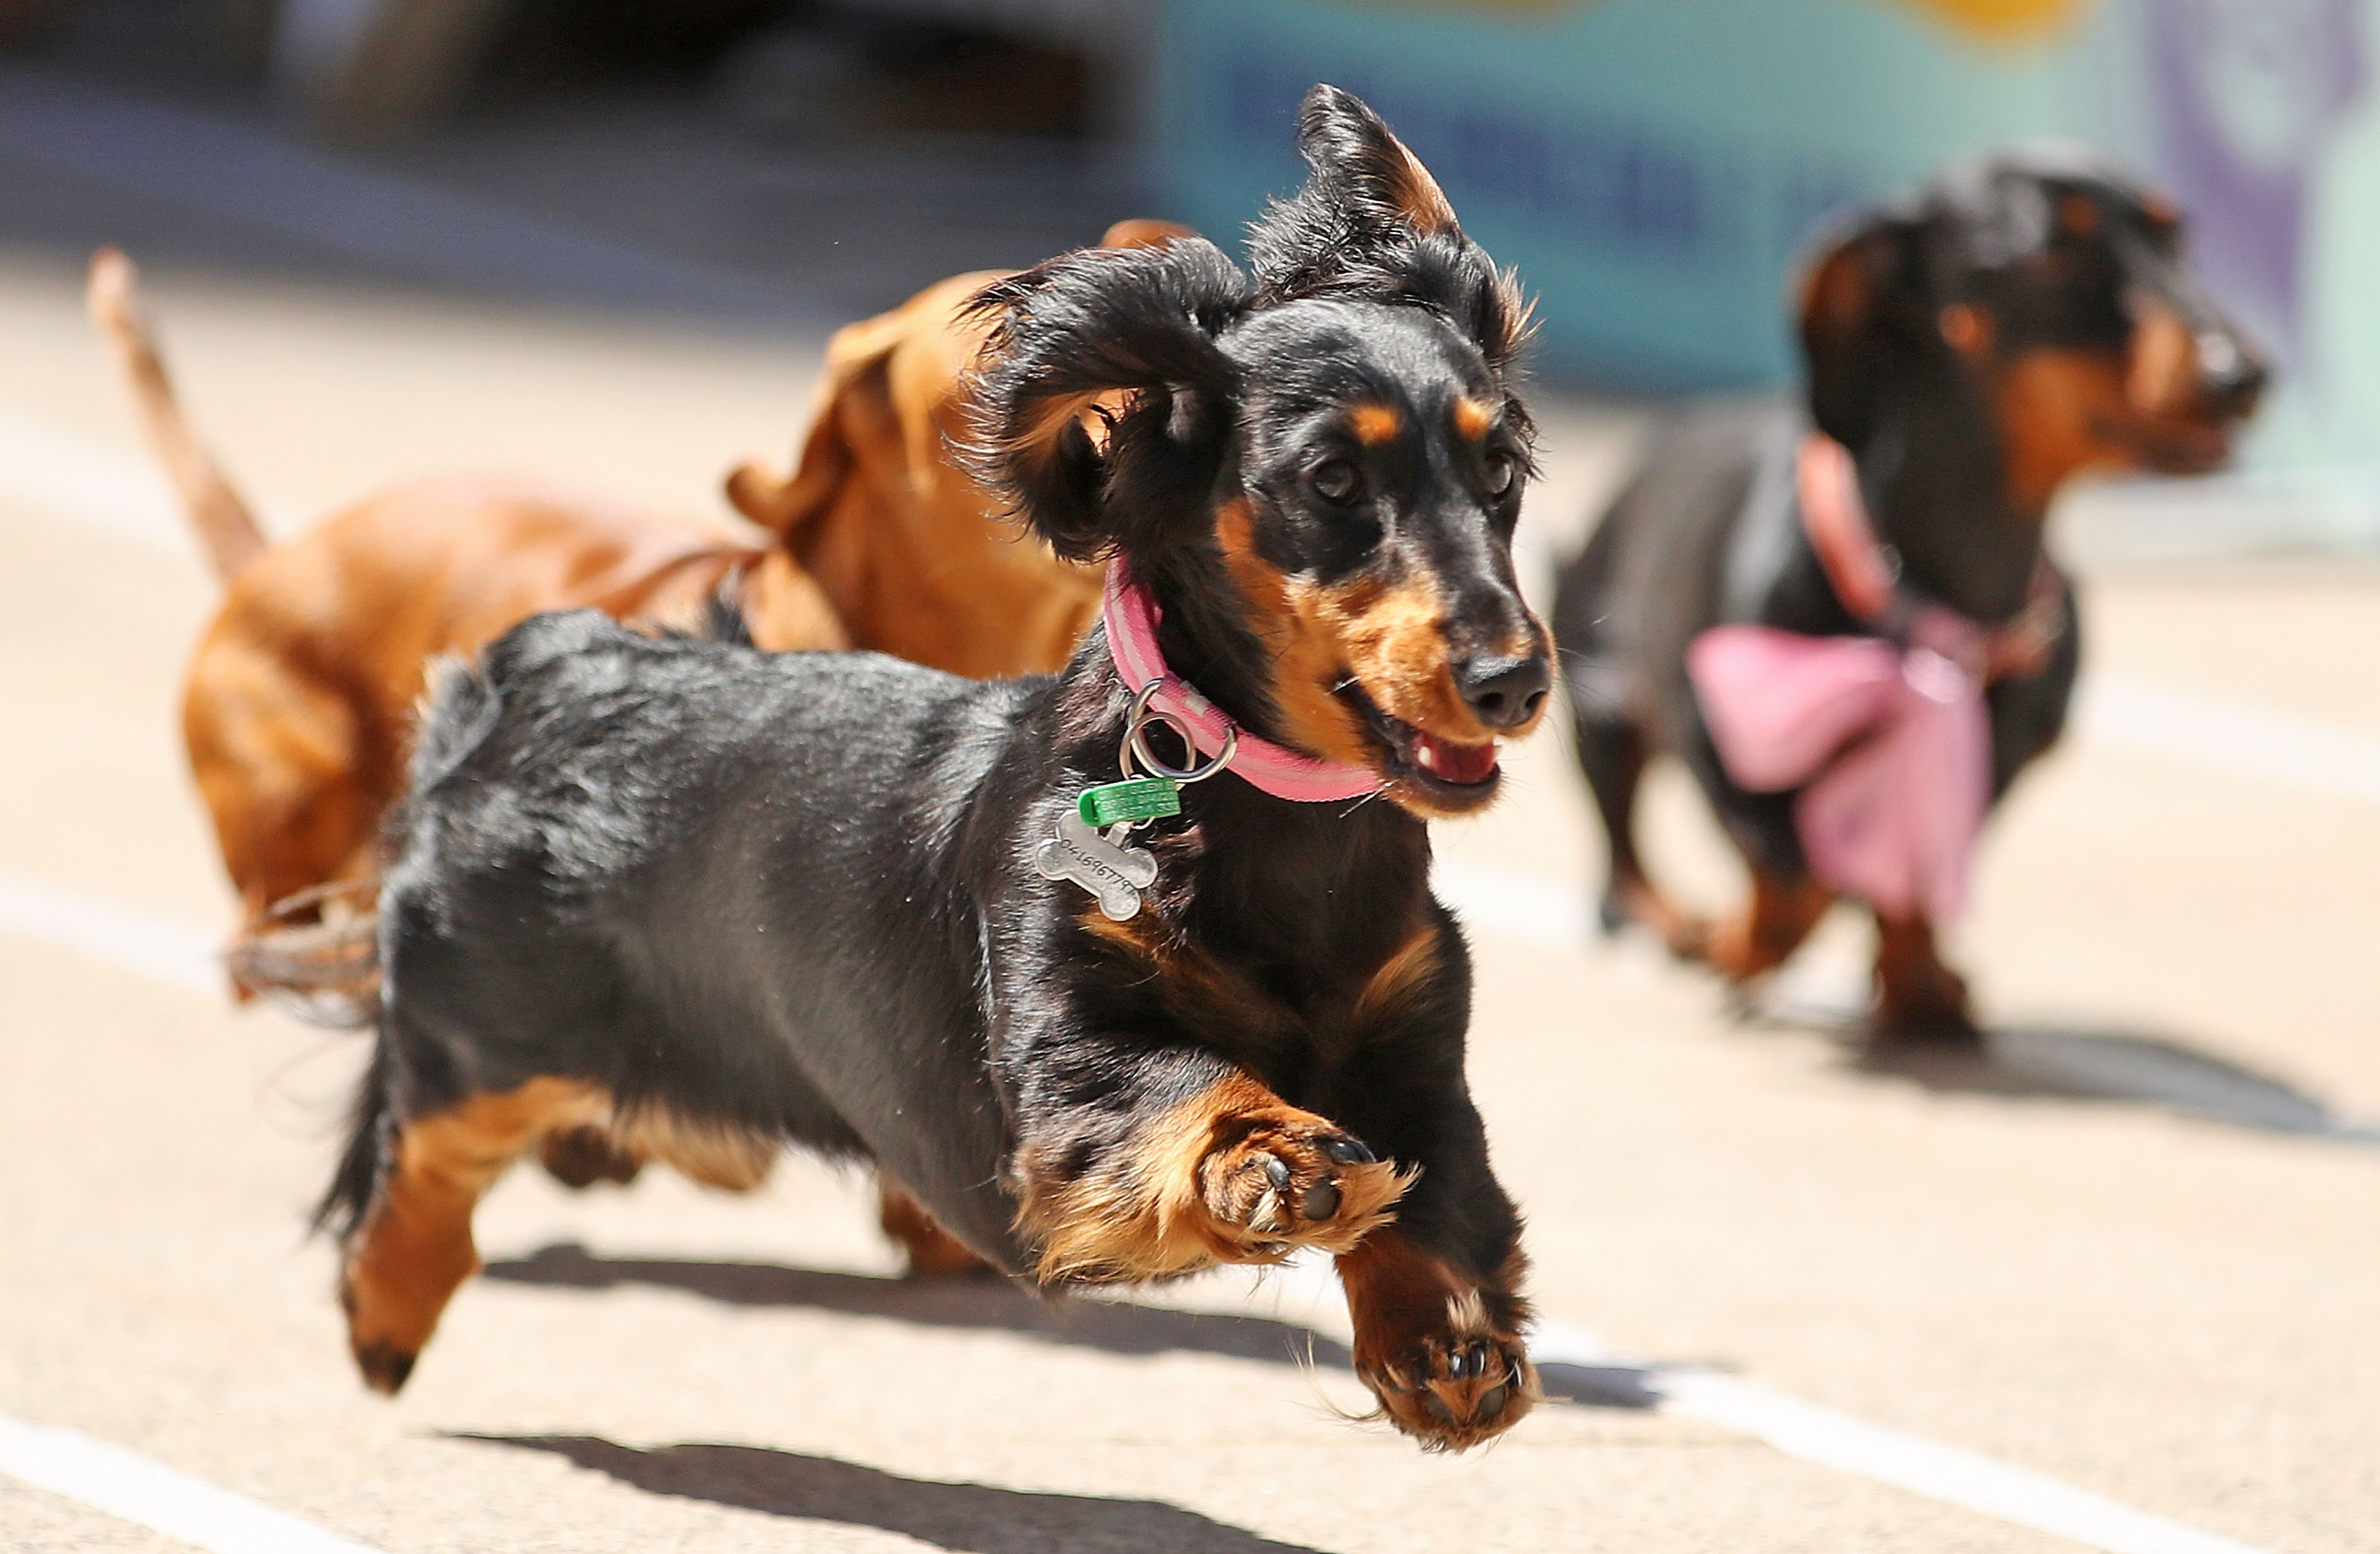 Dachshunds run as they compete in the annual Teckelrennen Hophaus Dachshund Race and Costume Parade on October 13, 2018 in Melbourne, Australia. The annual 'Running of the Wieners' is held to celebrate Oktoberfest. 